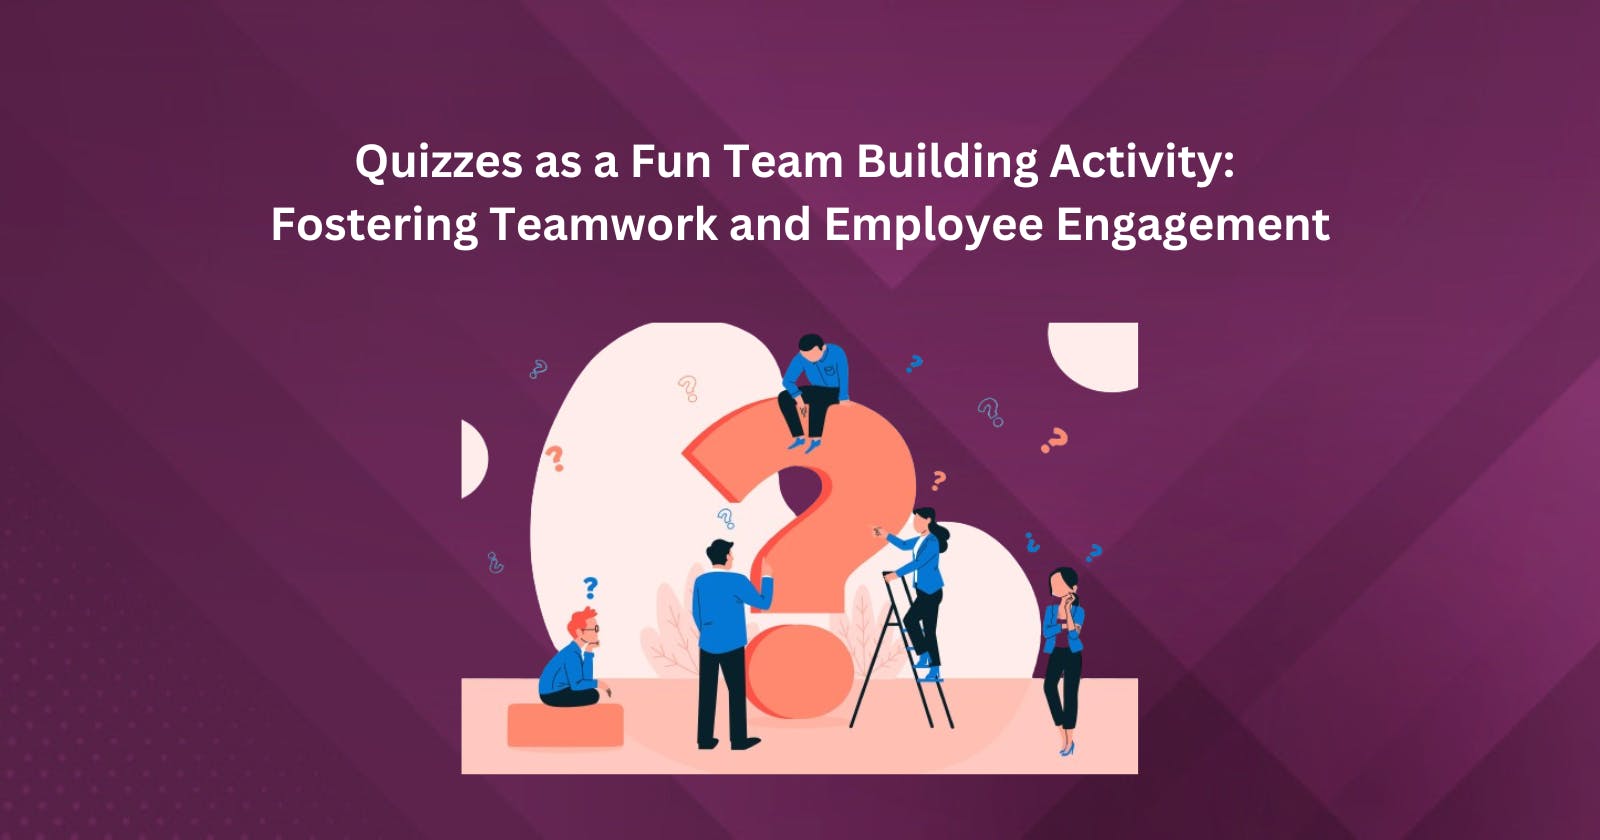 Quizzes as a Fun Team Building Activity: Fostering Teamwork and Employee Engagement